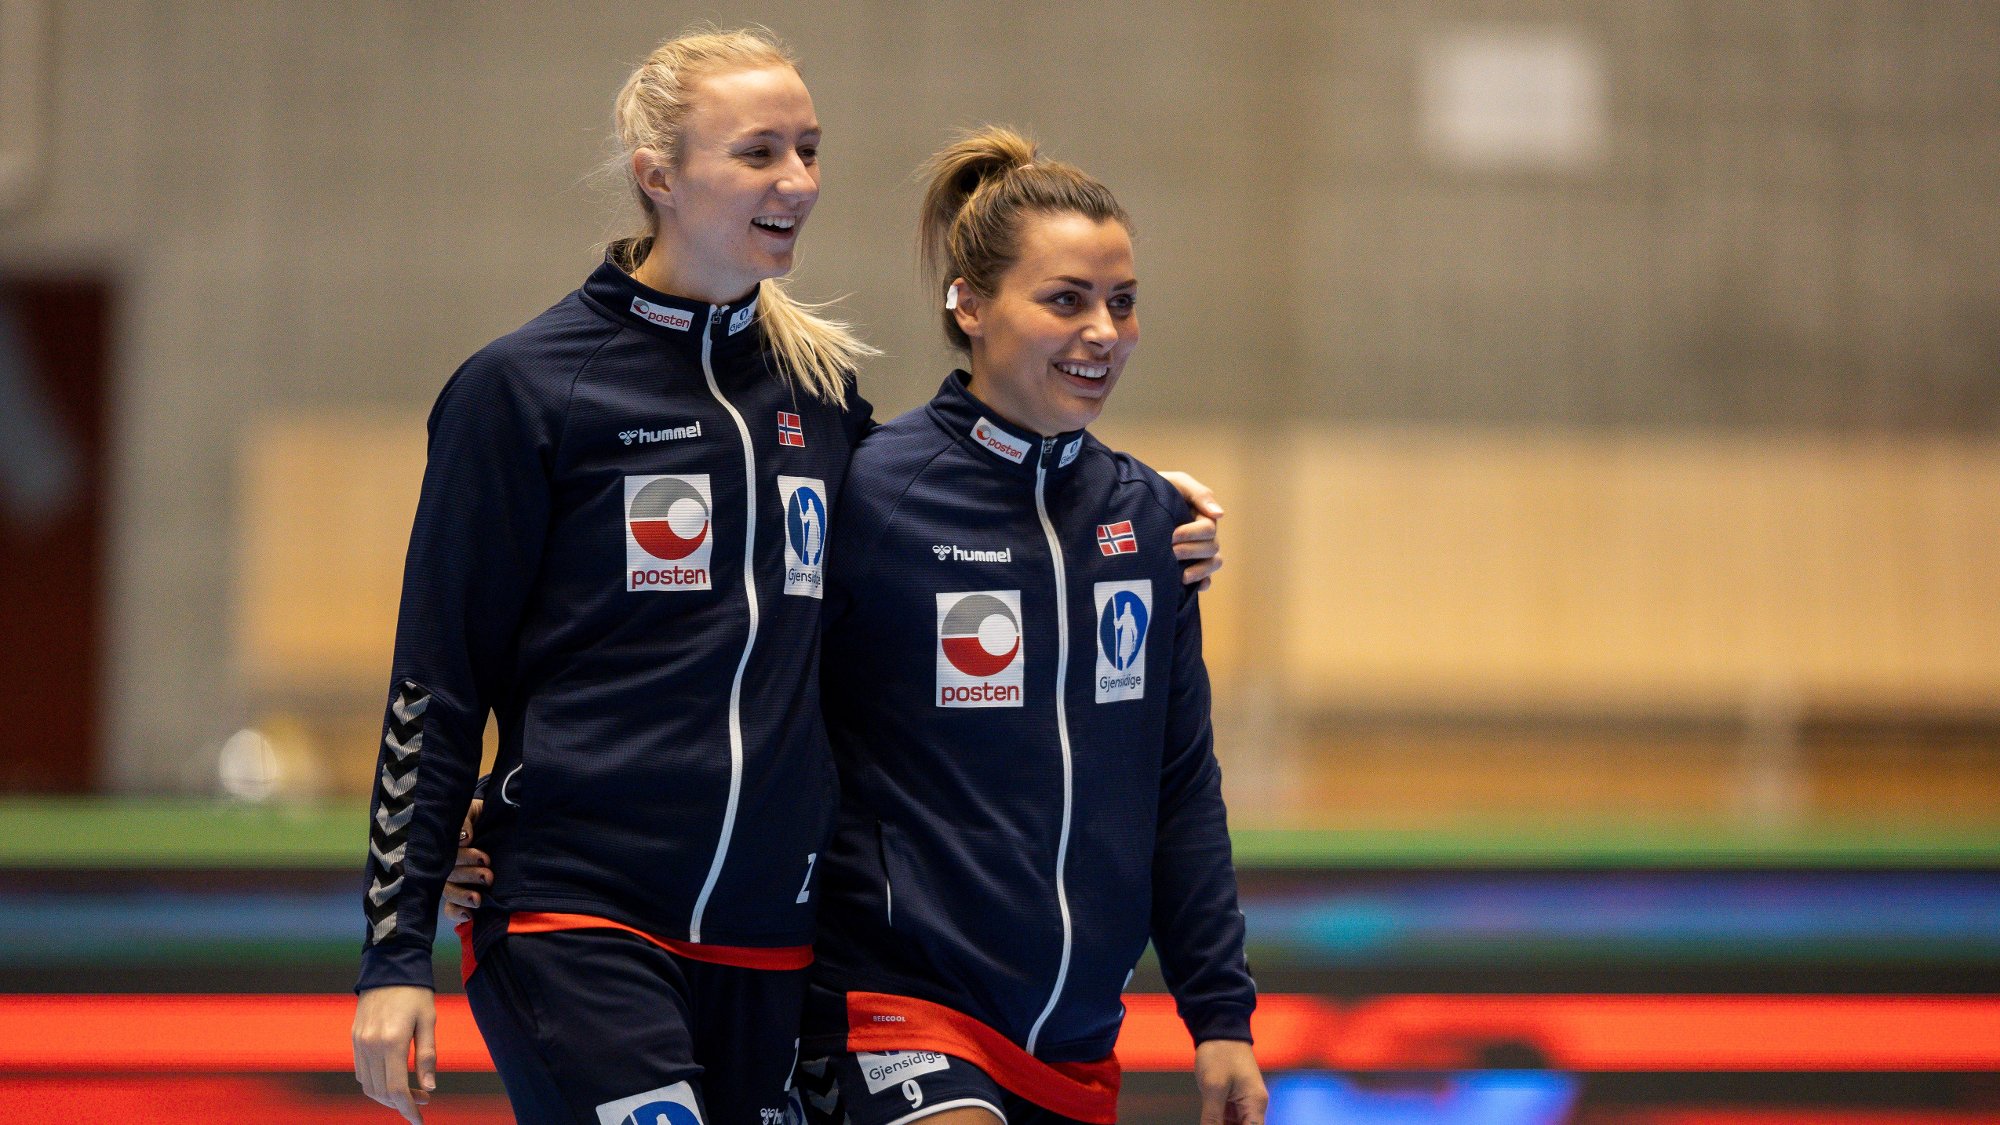 EC Handball, Girls Handball |  The Norwegian star didn't think she'd become part of the girlfriends trend: - I never thought of that